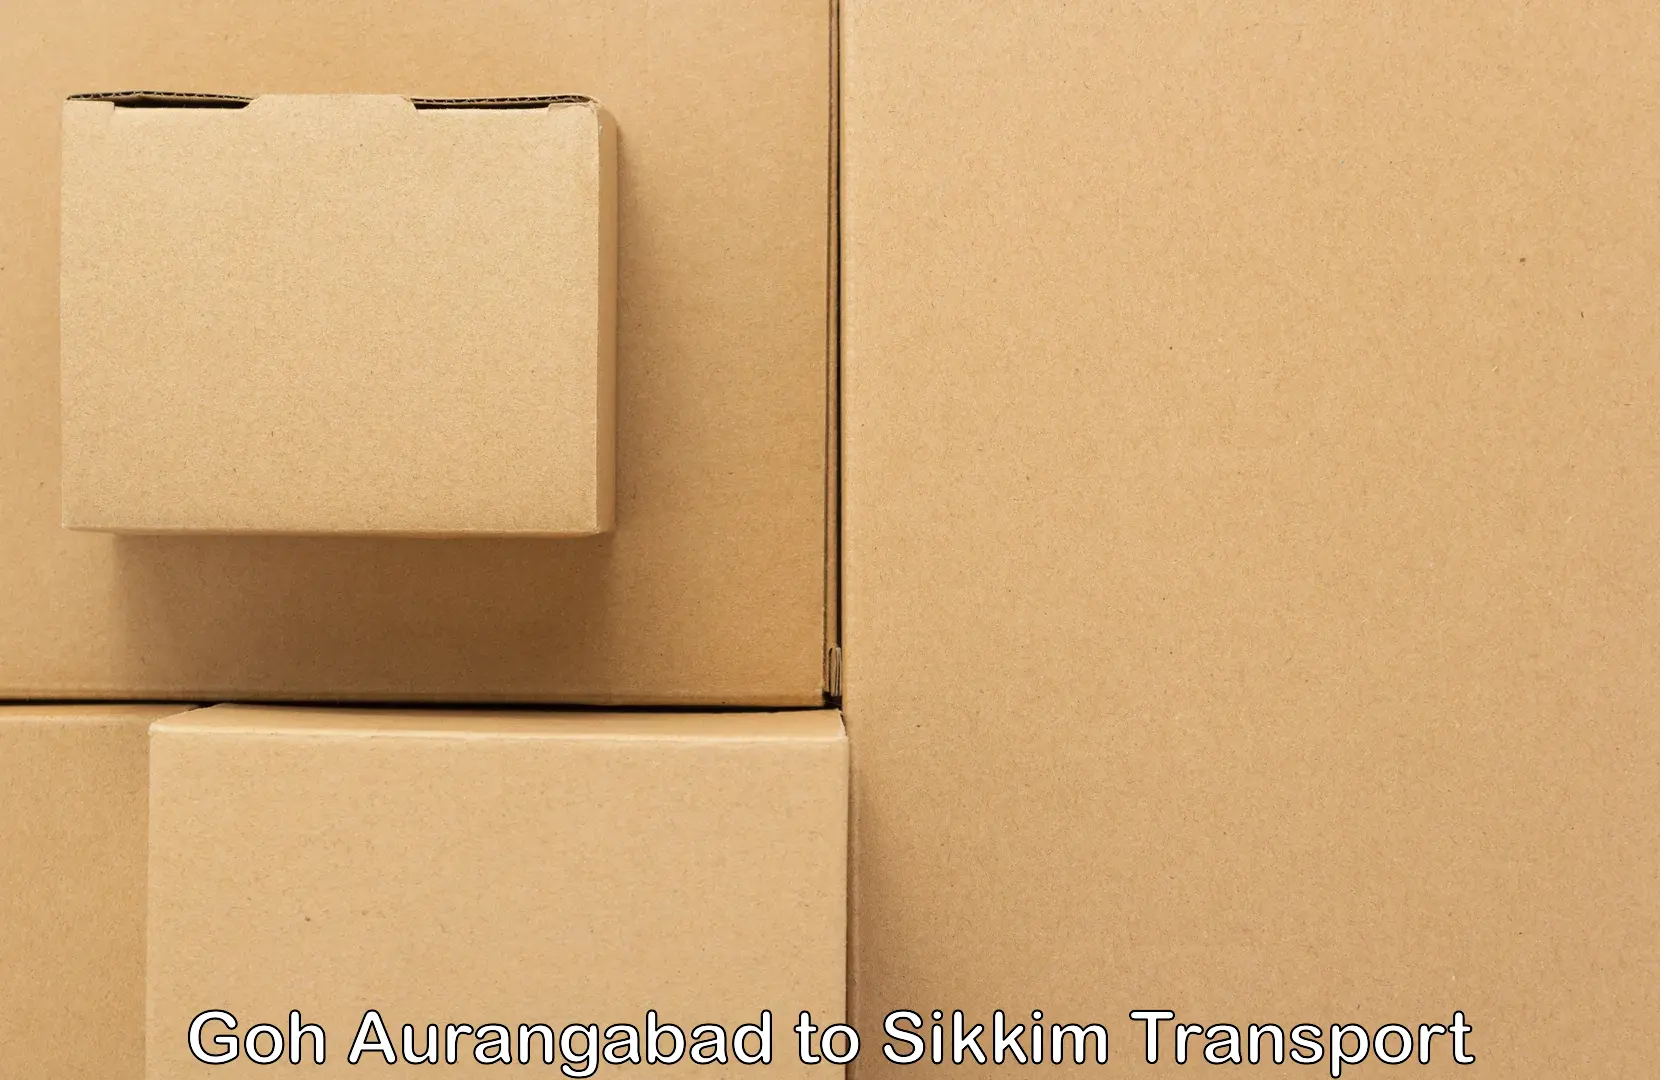 Express transport services in Goh Aurangabad to South Sikkim